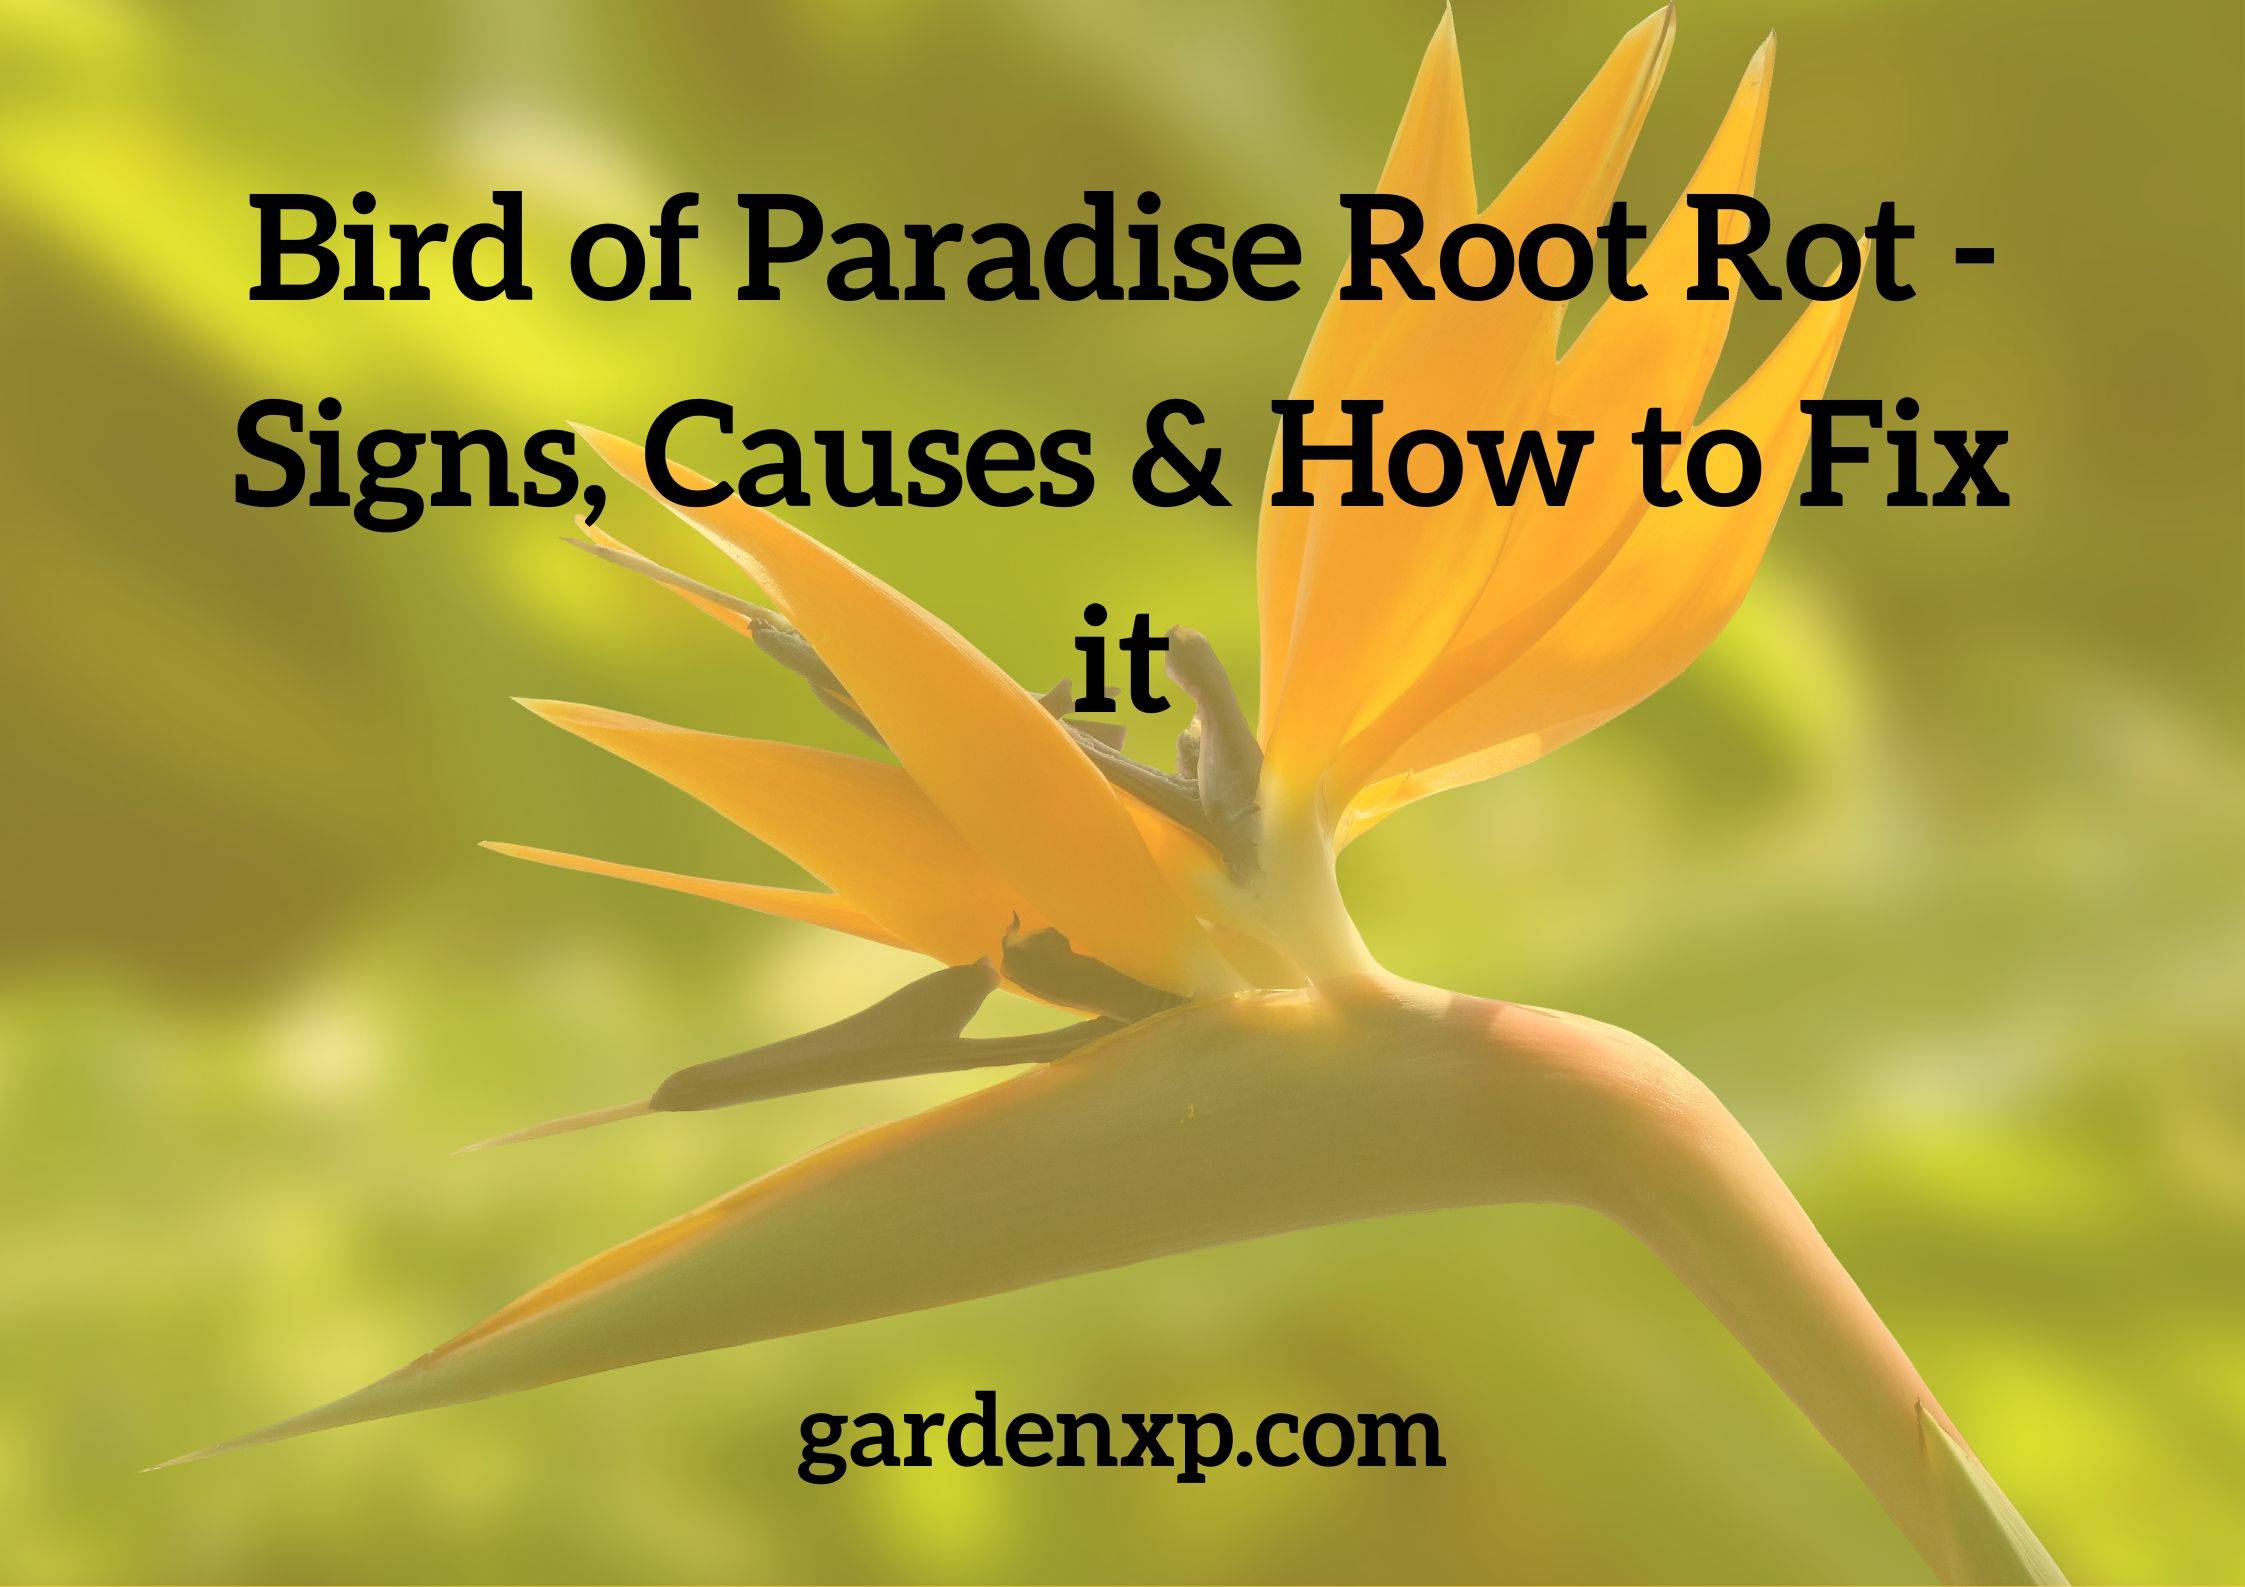 Bird of Paradise Root Rot - Signs, Causes & How to Fix it